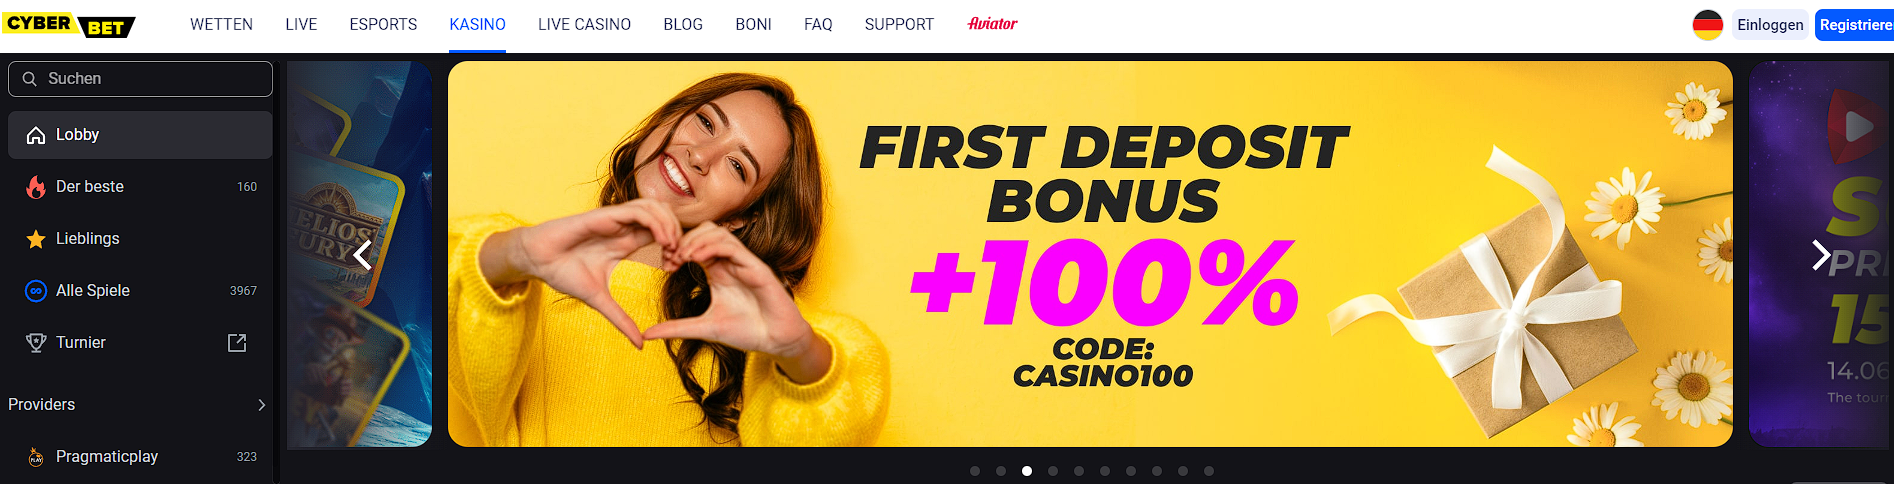 Cyber.bet Casino Review with Bonus Codes